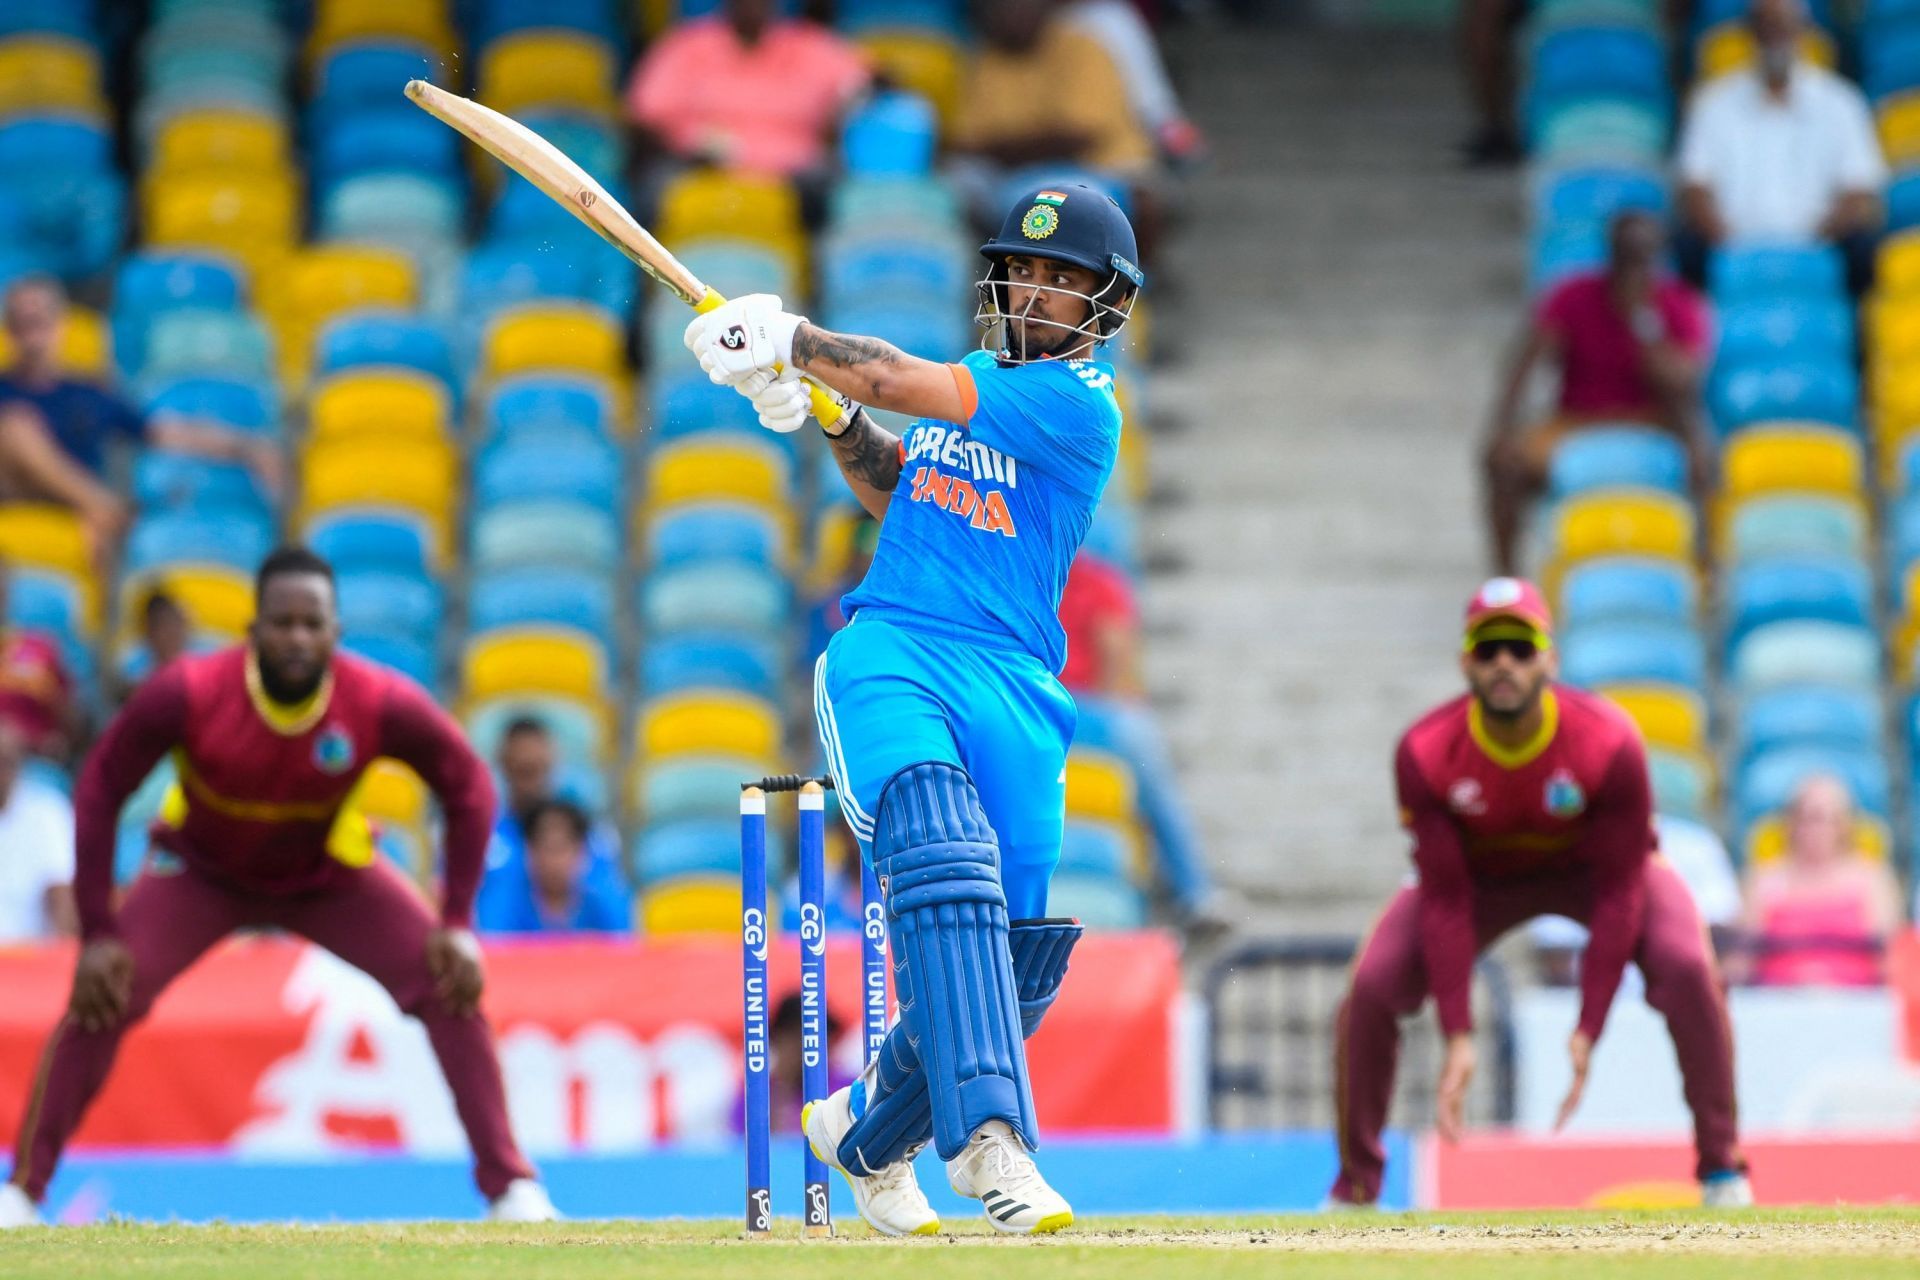 Ishan Kishan was in excellent form during the ODI series